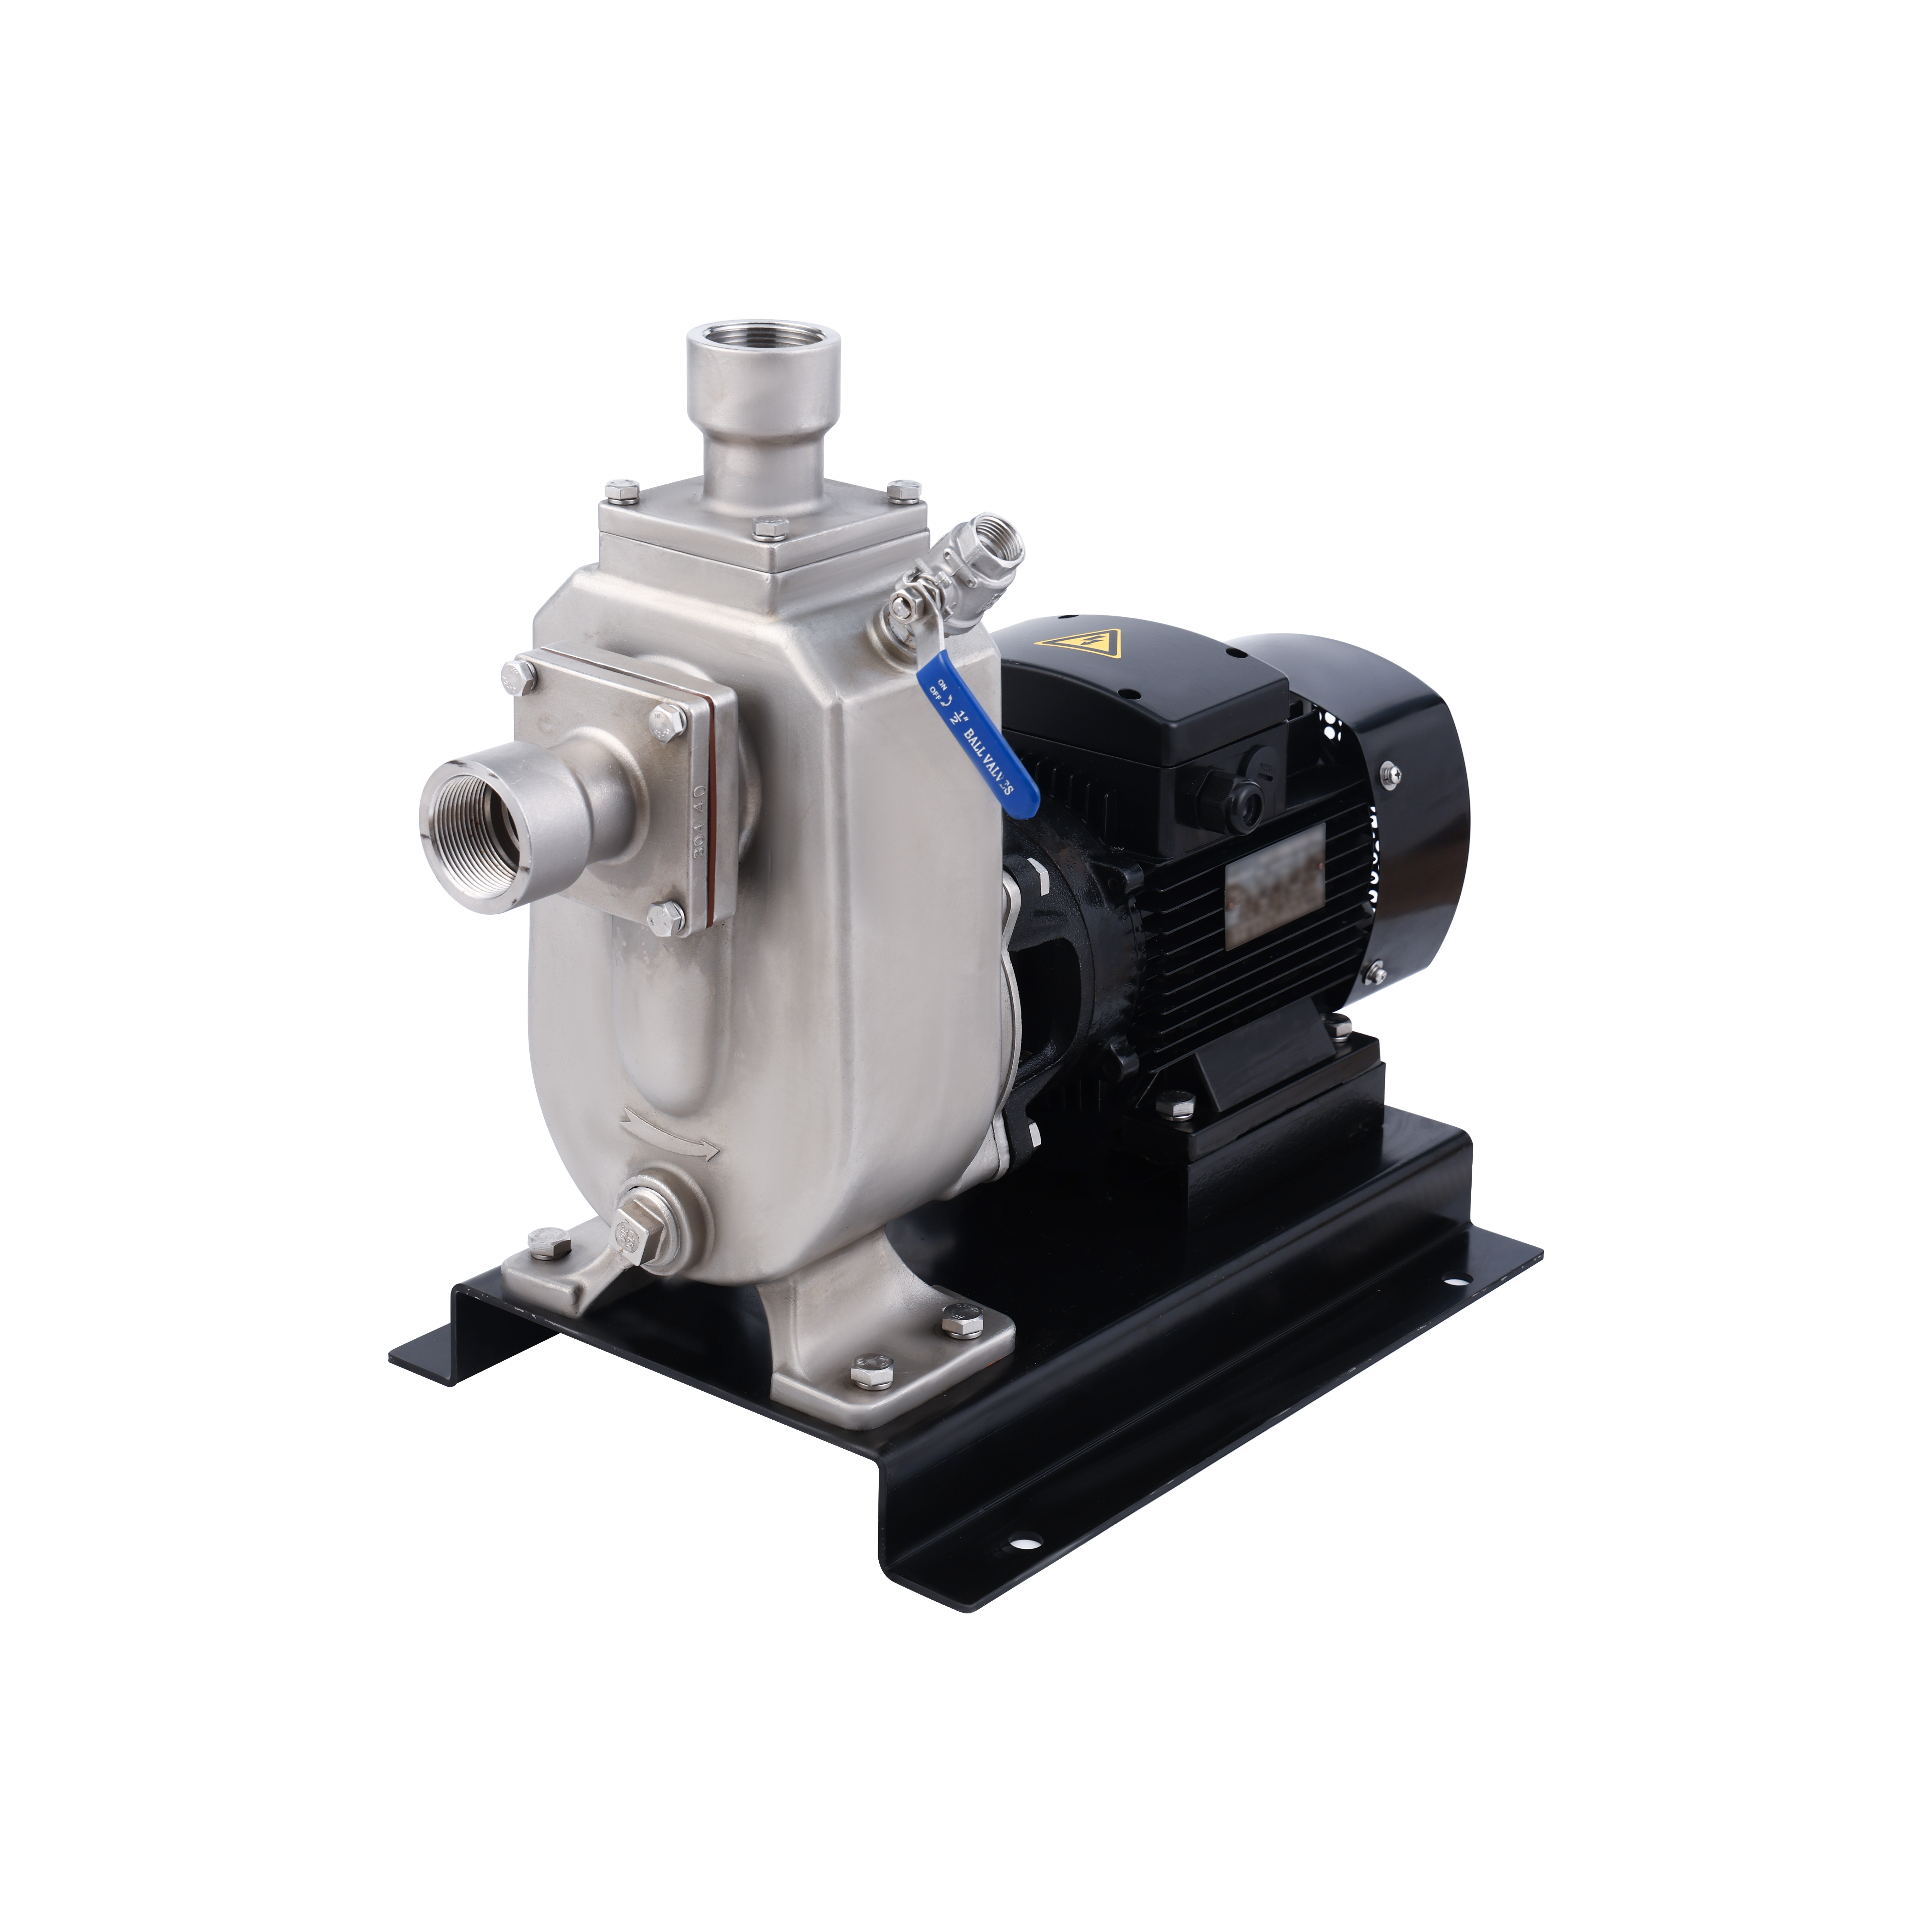 Gasoline engine air compressors are air compressors powered by gasoline engines